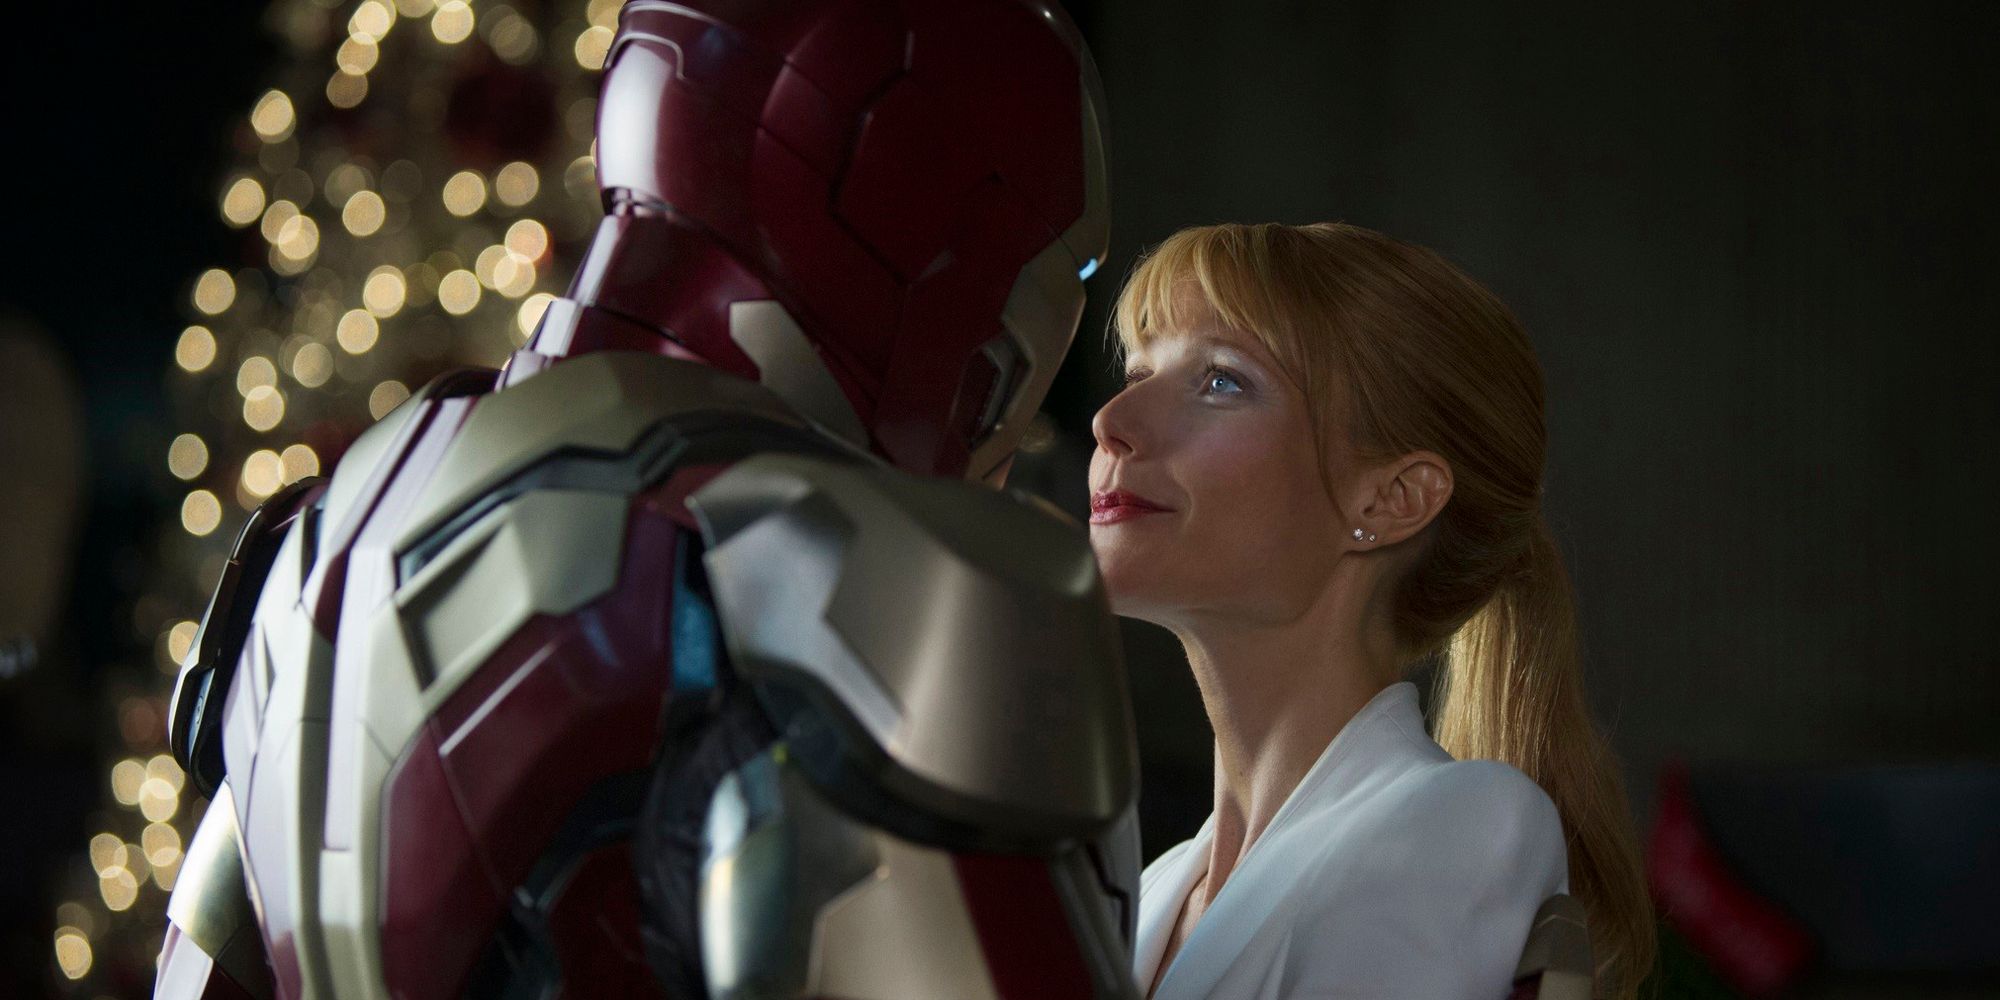 Pepper Potts Getting Close With Iron Man in Front of Christmas Tree in Iron Man 3